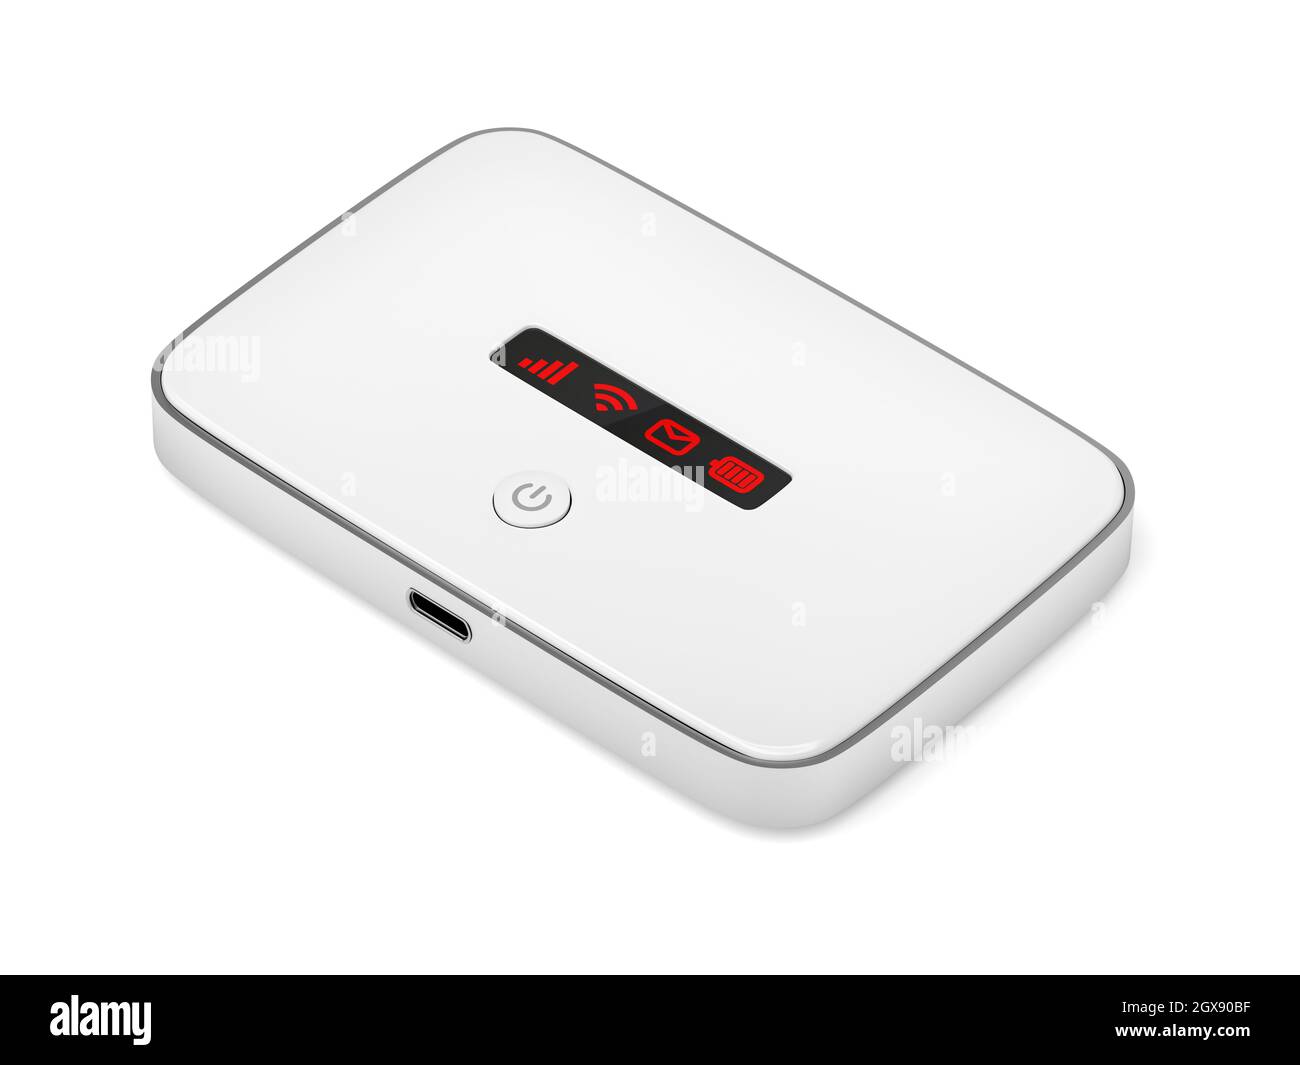 Pocket Router High Resolution Stock Photography and Images - Alamy